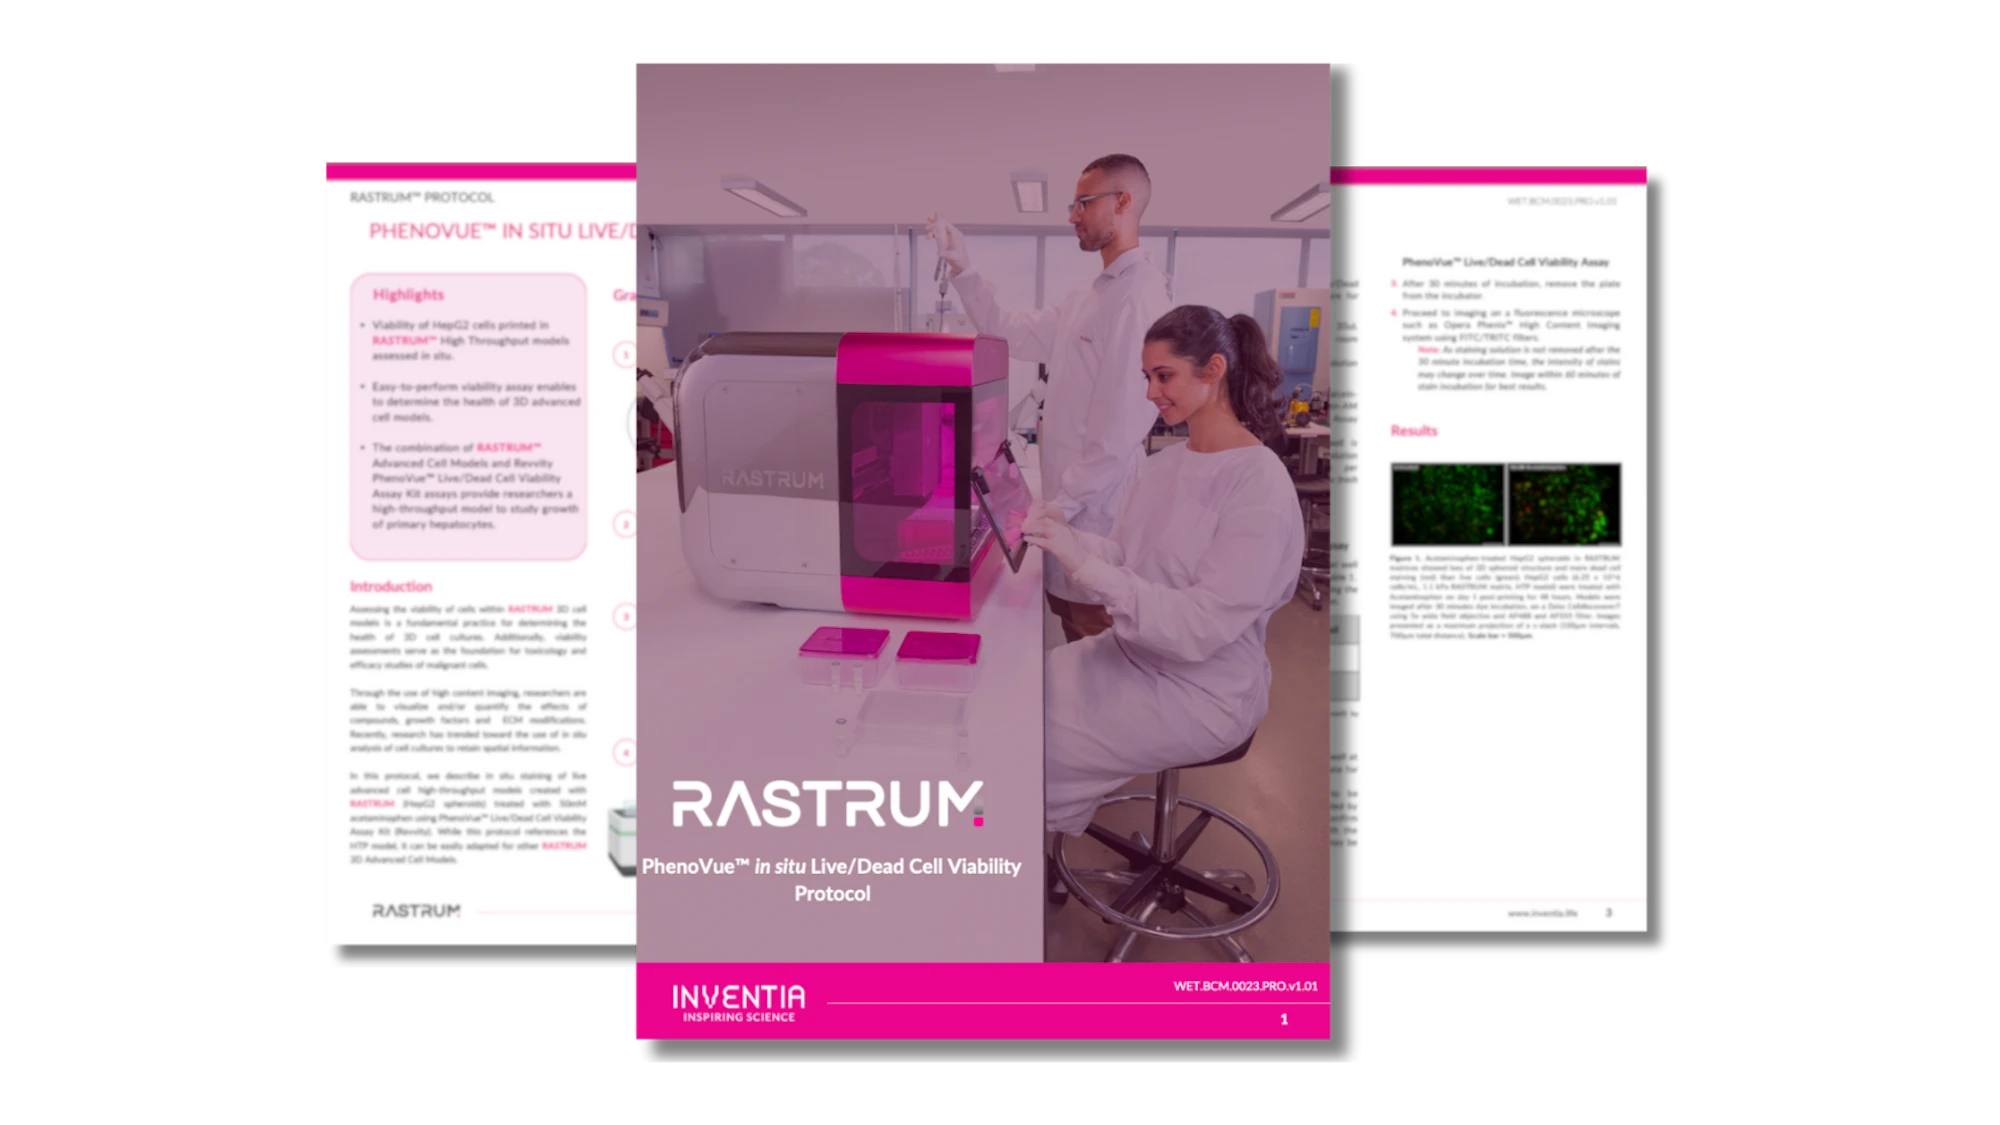 PhenoVue™ In Situ Live/Dead Cell Viability with RASTRUM™ 3D Advanced Cell Models